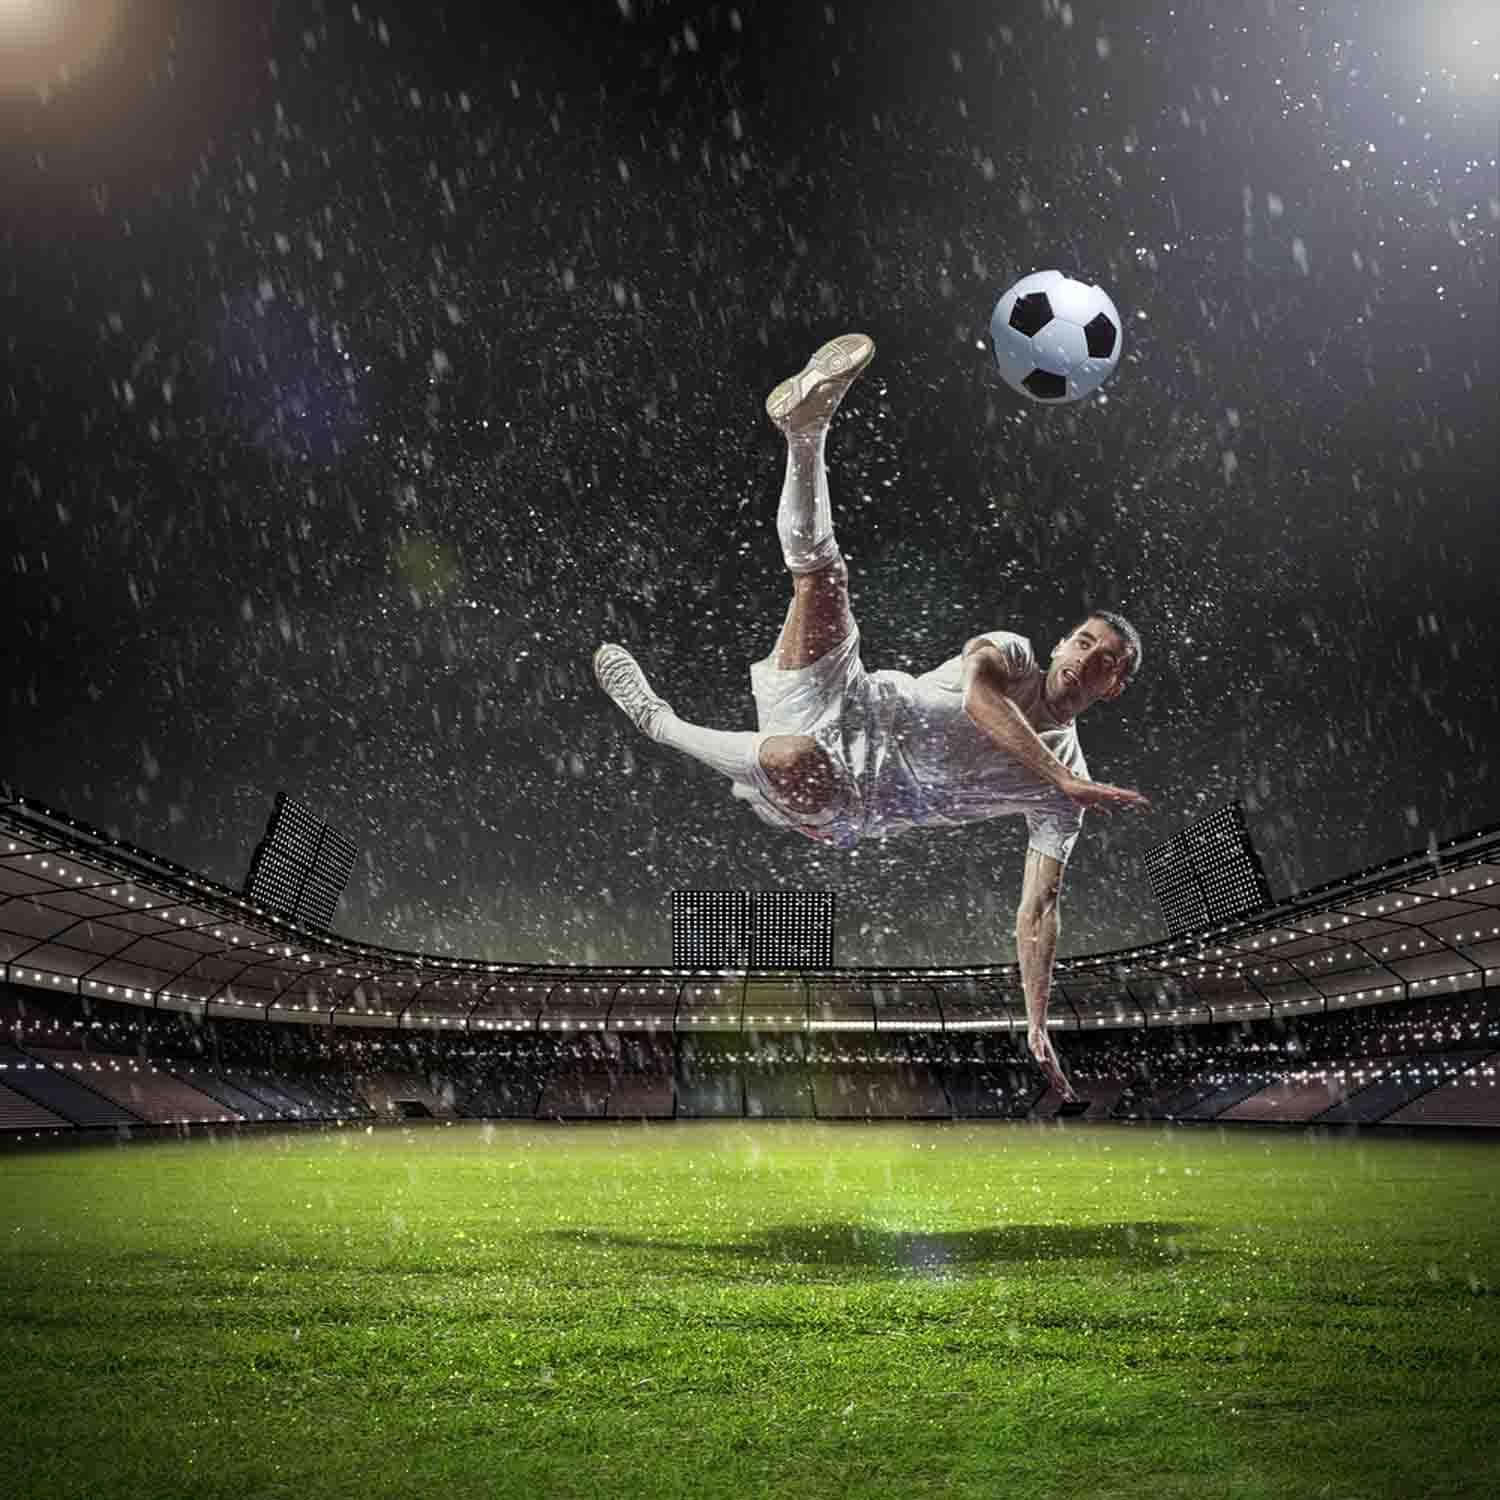 A soccer player in the air kicking a soccer ball - Soccer